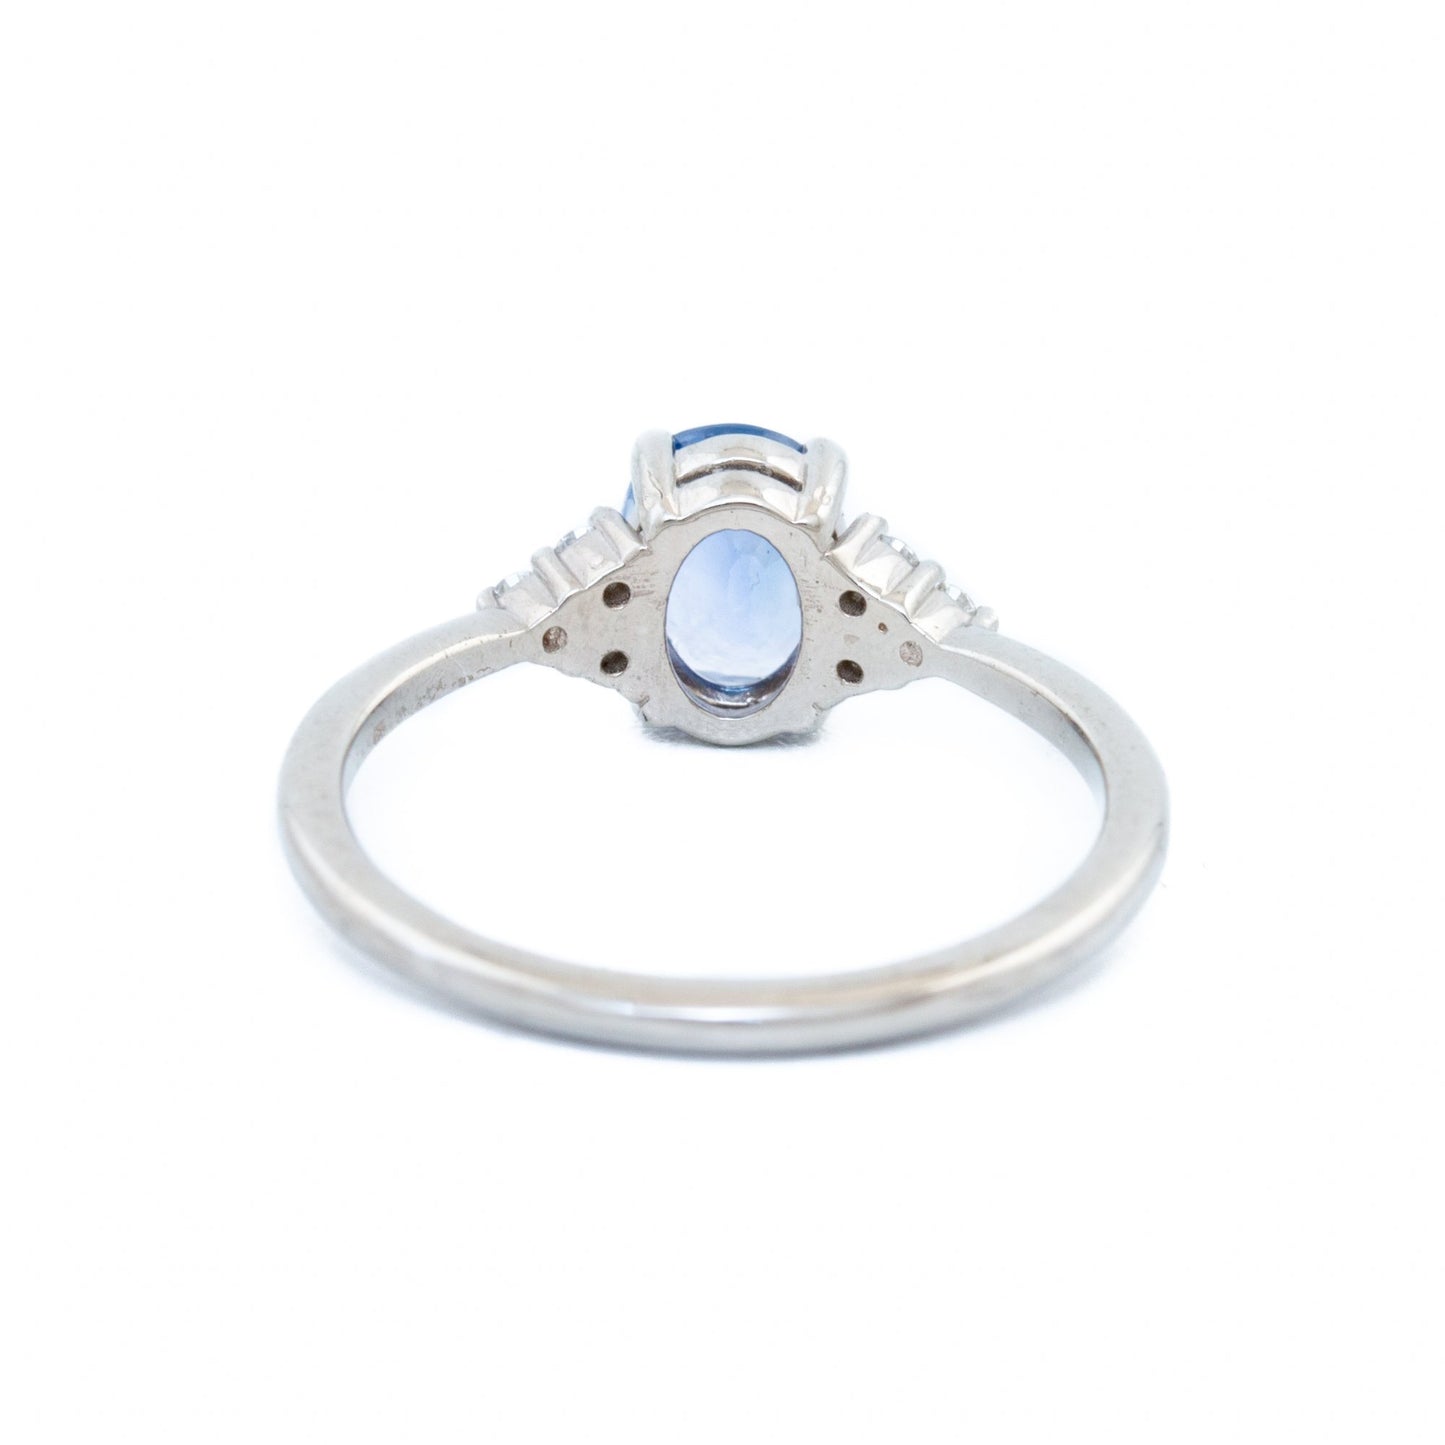 Periwinkle Sapphire Engagement Ring - Kingdom Jewelry